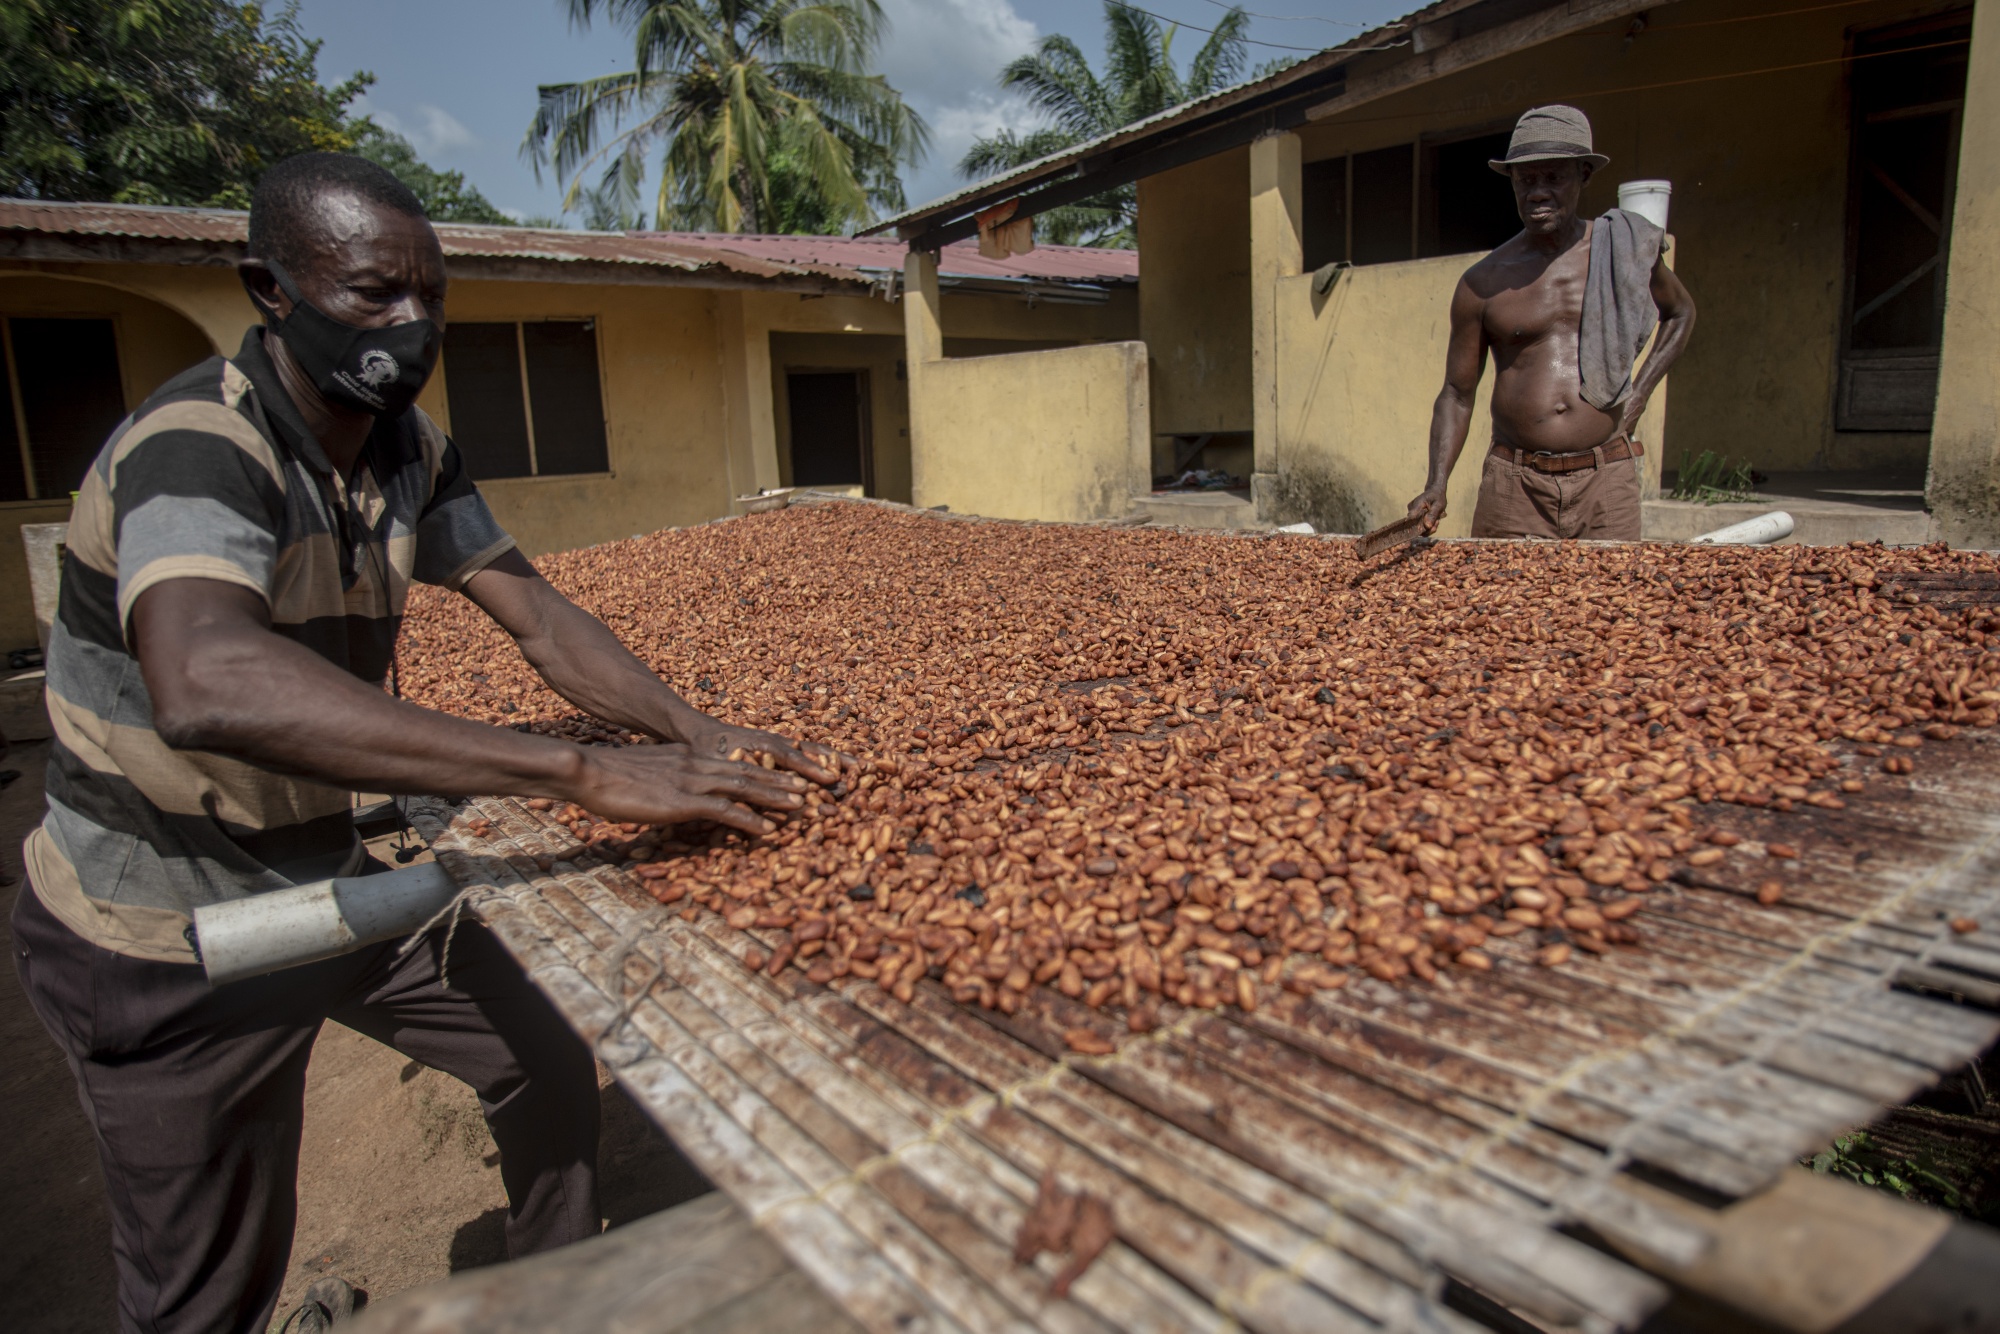 Cocoa farmers spread cocoa beans during the sun-drying process in Asikasu, Ghana.